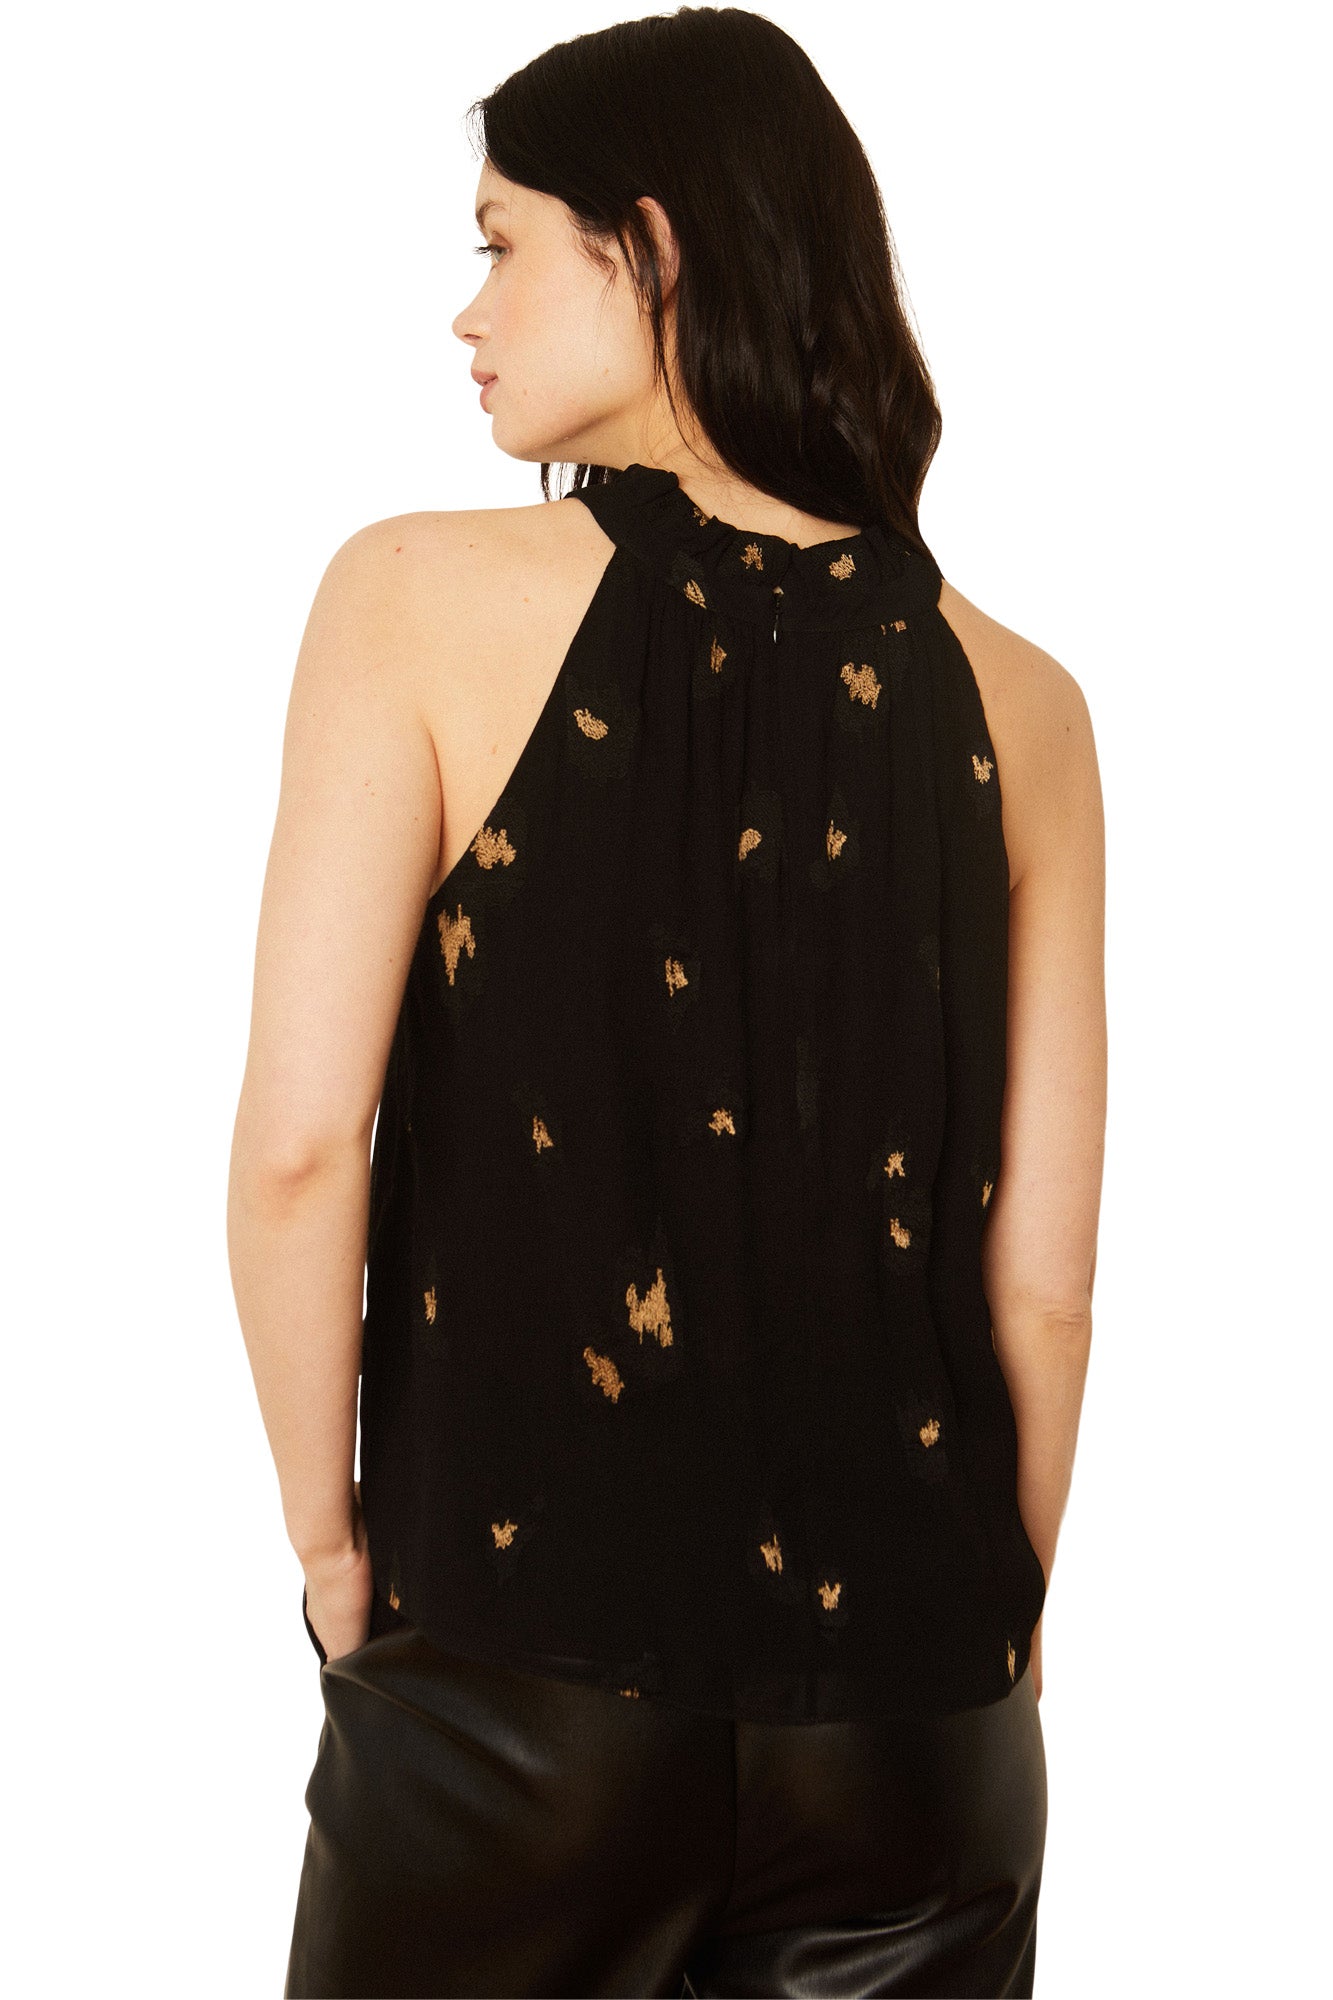 Caballero Hollie Top in Starry Night Jacquard